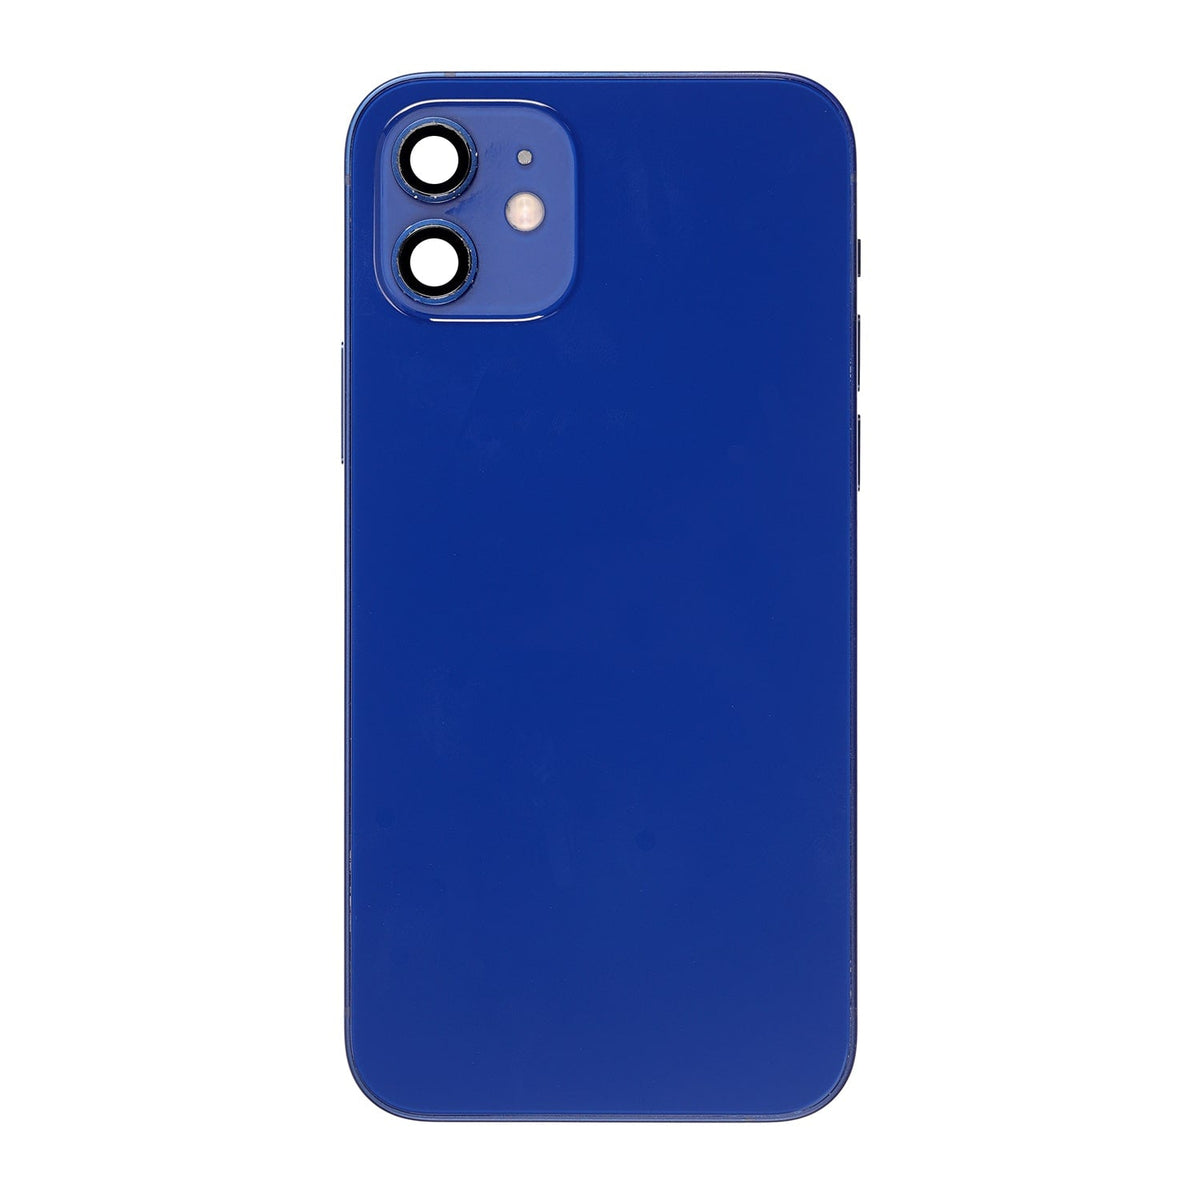 BLUE BACK COVER FULL ASSEMBLY  FOR IPHONE 12 MINI